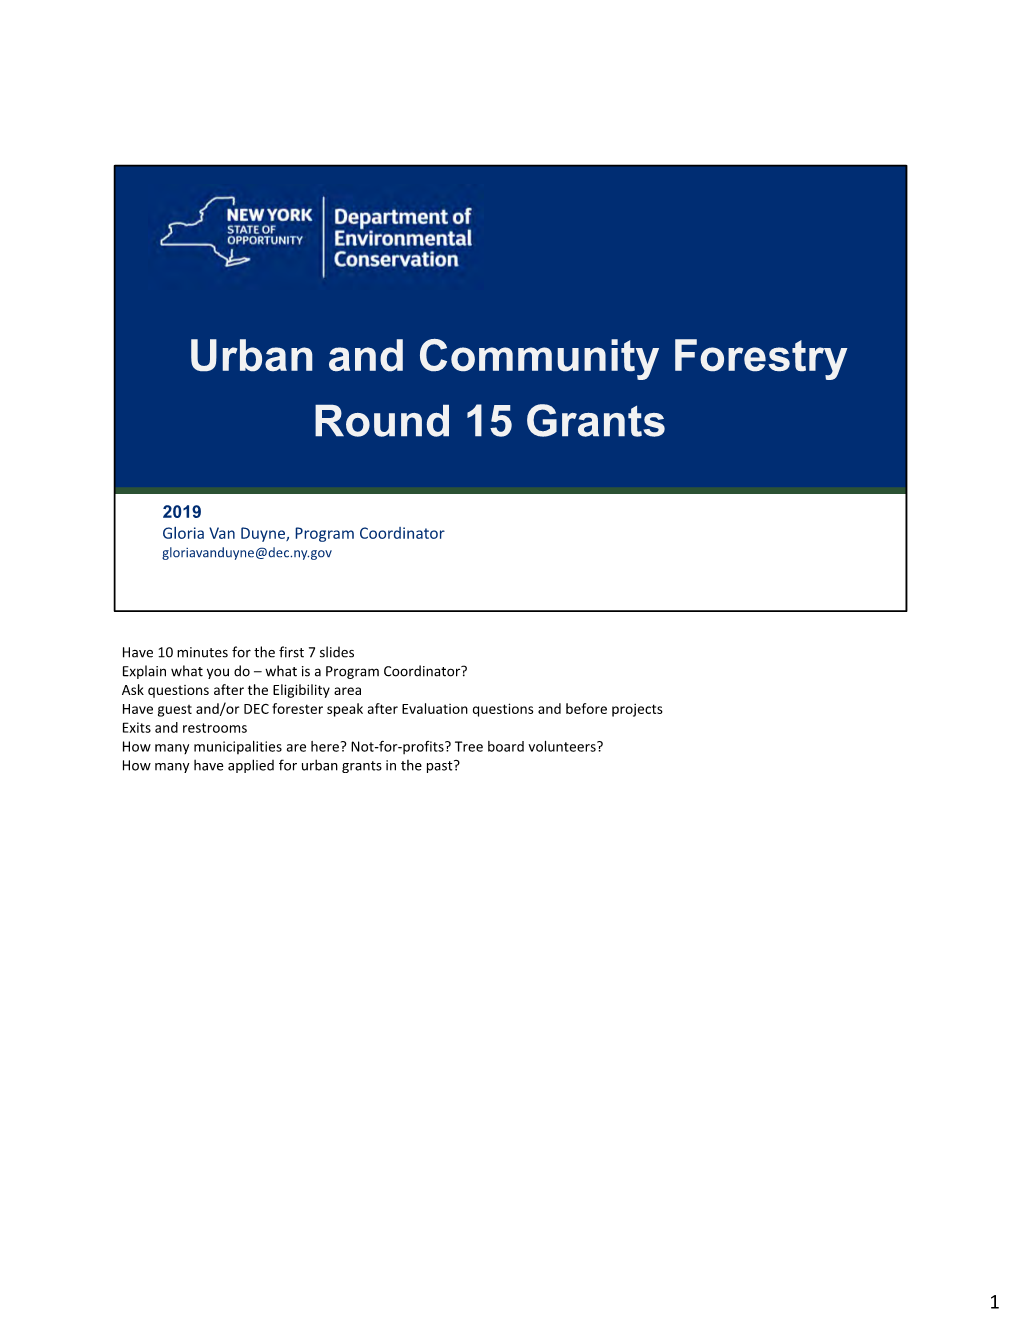 Tree Inventory • Community Forest Management Plans • Education